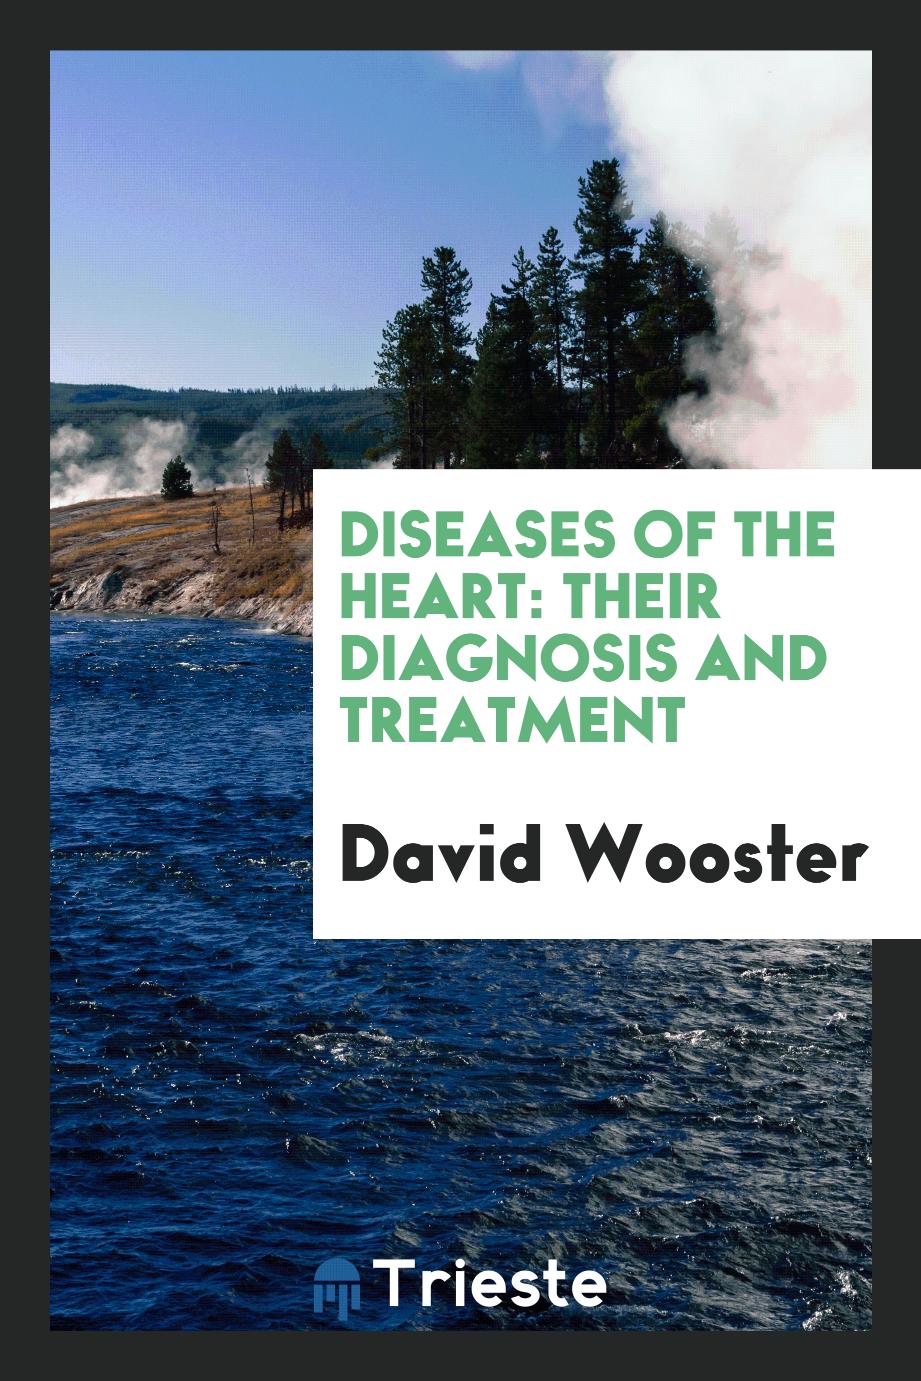 Diseases of the heart: their diagnosis and treatment